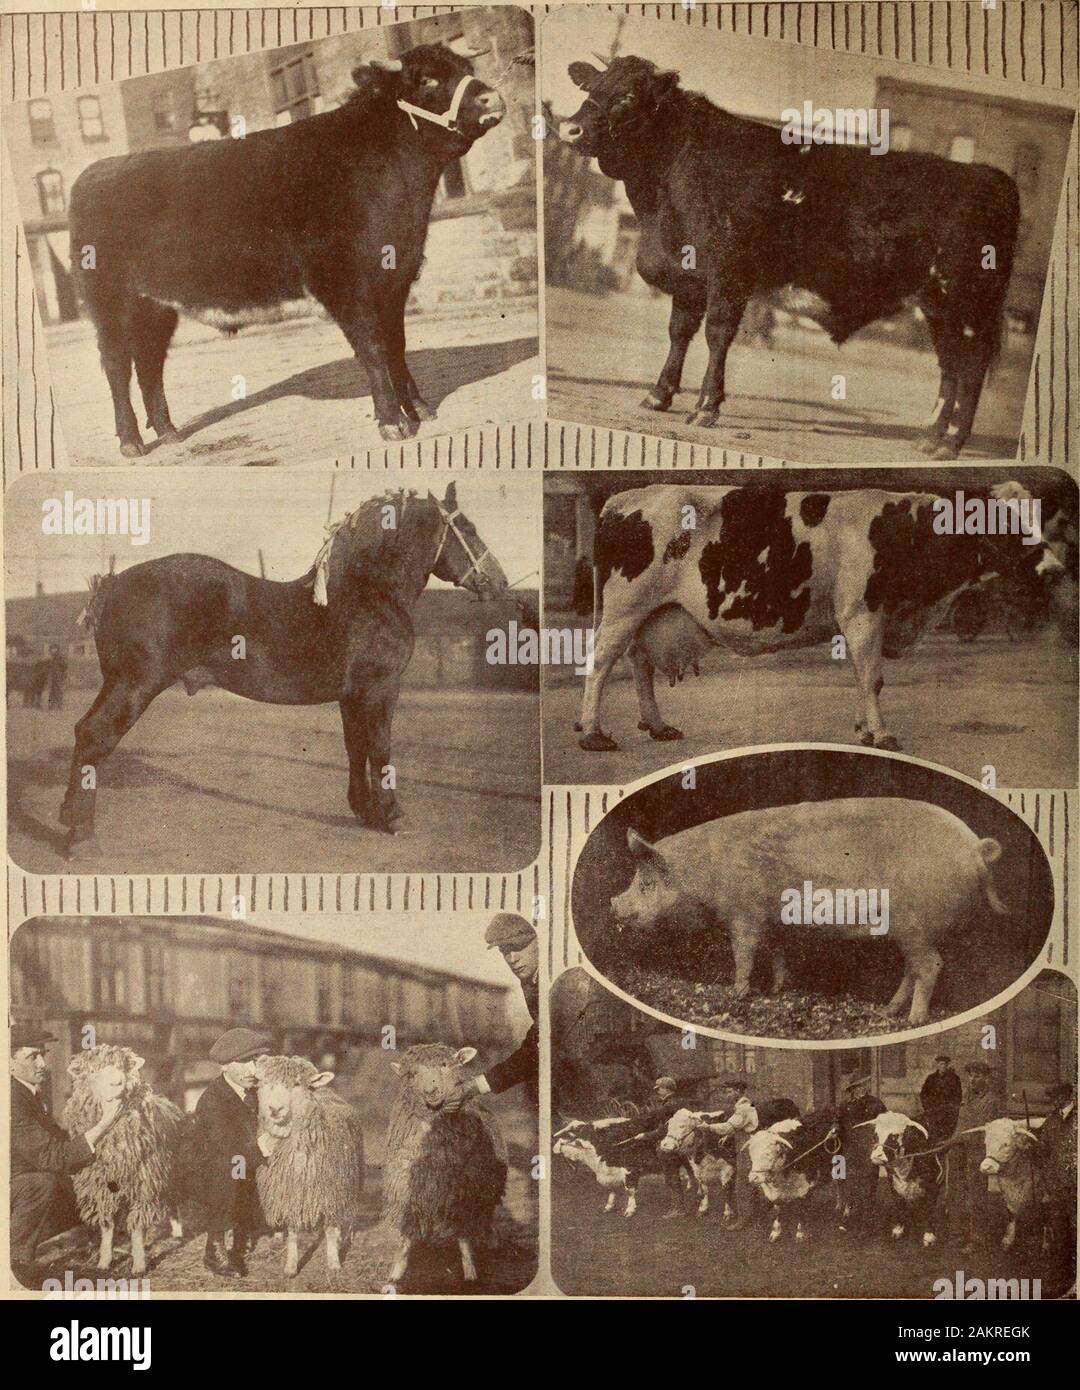 Farmer's magazine (January-December 1920) . PIPELESS pt^^Ufs^ Farmers Magazine A FEW OF THE BEST AT THE GUELPH SHOW Deoeml.er IT). 1920. Left Section.—Matchless Pete, Grand Champion Steer of the Show. Shown by John Kopag^ & Son, Elora. Zique, first prize 3-year-old Percheron Stallion. Owned by Lafayette Stock Farm, London. Winning Cotswolds, owned by G. H. Mark & Son. I,ittle Brilain, Ont. Rigrht Section.—Charlie Chaplin. Champion Shorthorn Steer and winner of intcr-coiinly b.iby-becf contest. Shown by J. Lerch & Son, Preston. Marion DeKol 2nd, winner of the Dairy Test. Owned by J. G. Currie, Stock Photo